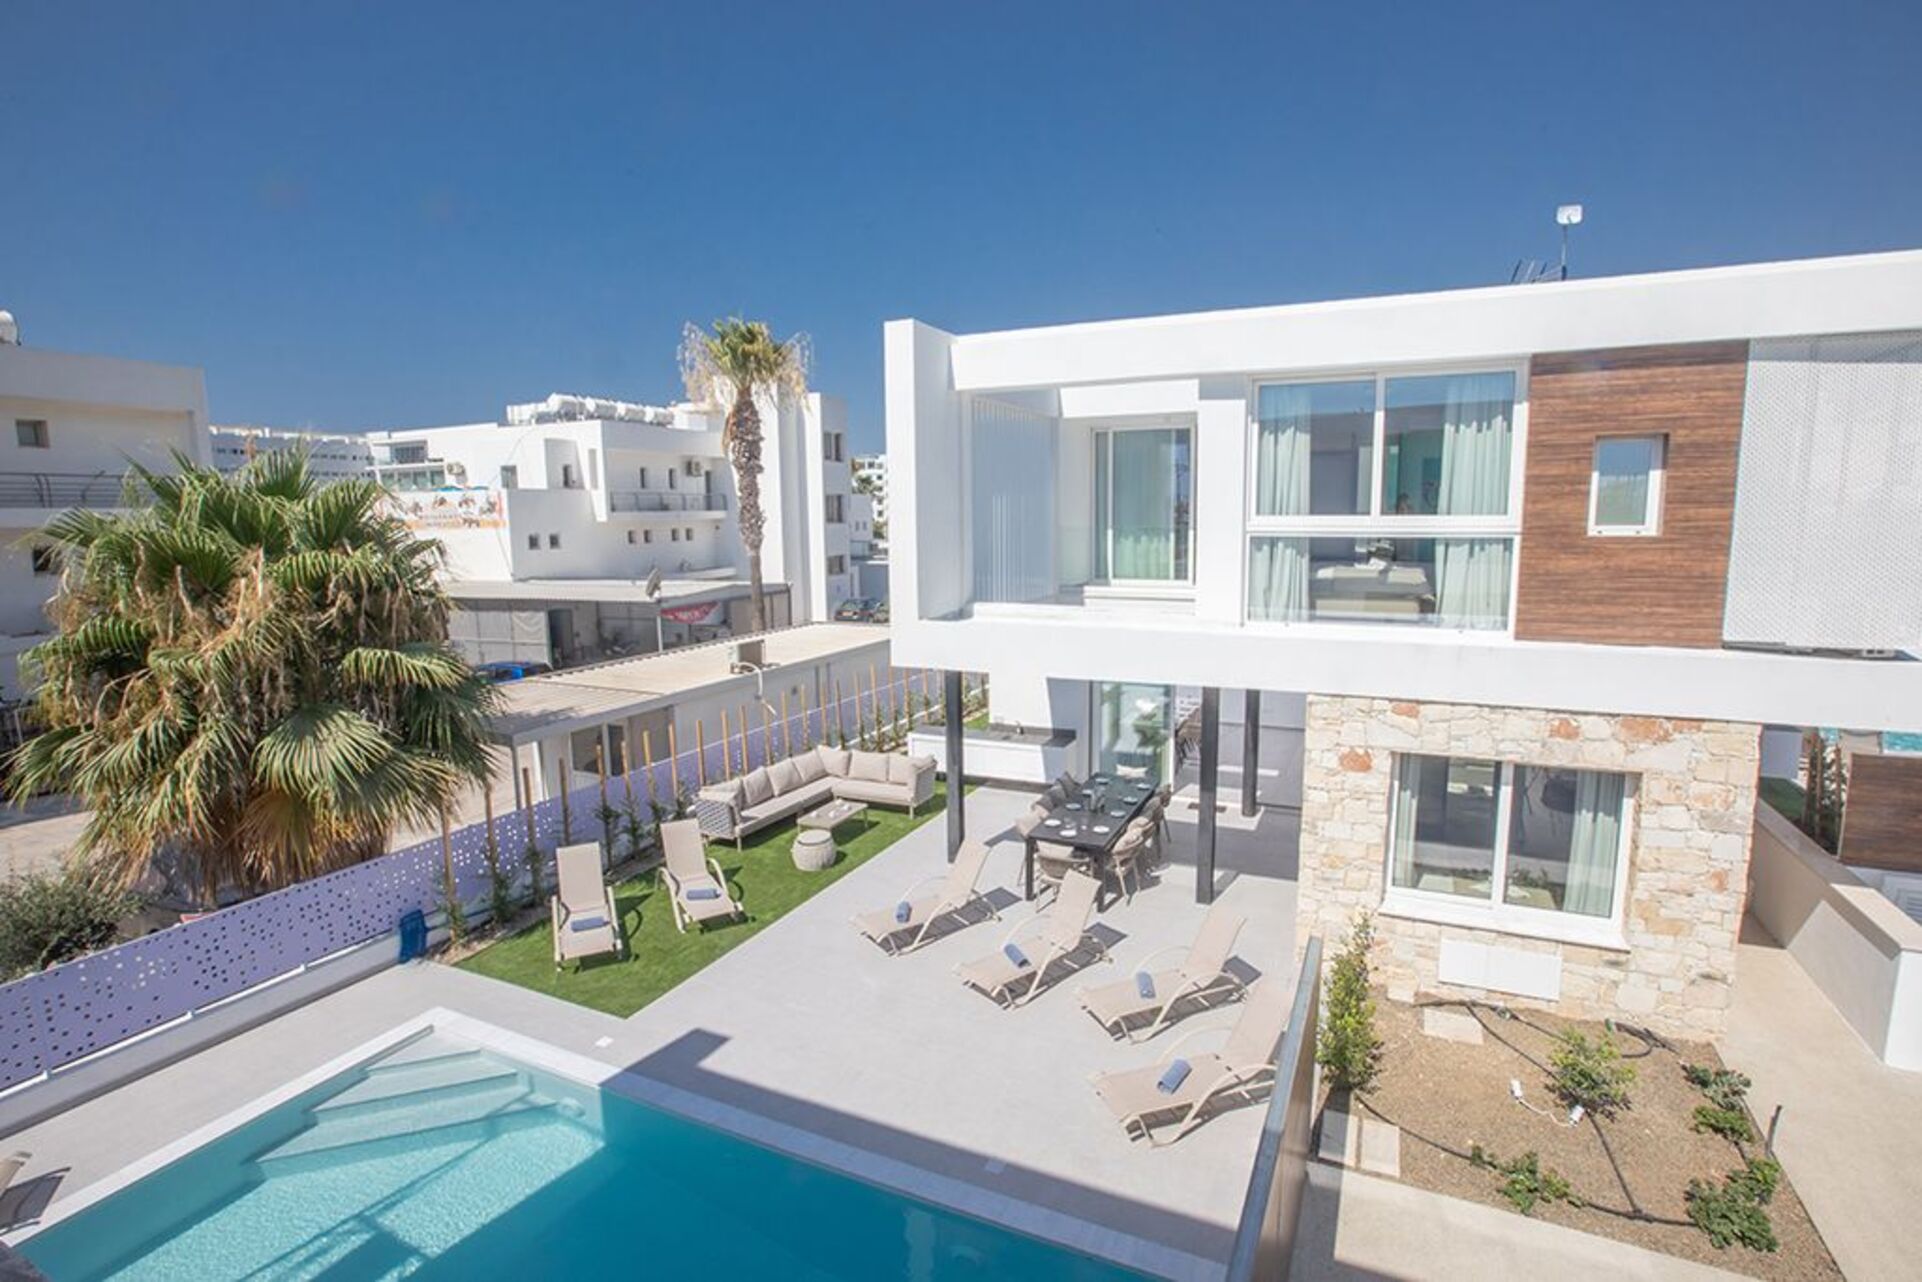 Property Image 2 - Rent Your Dream Ayia Napa Holiday Villa and Look Forward to Relaxing Beside Your Private Pool, Ayia Napa V